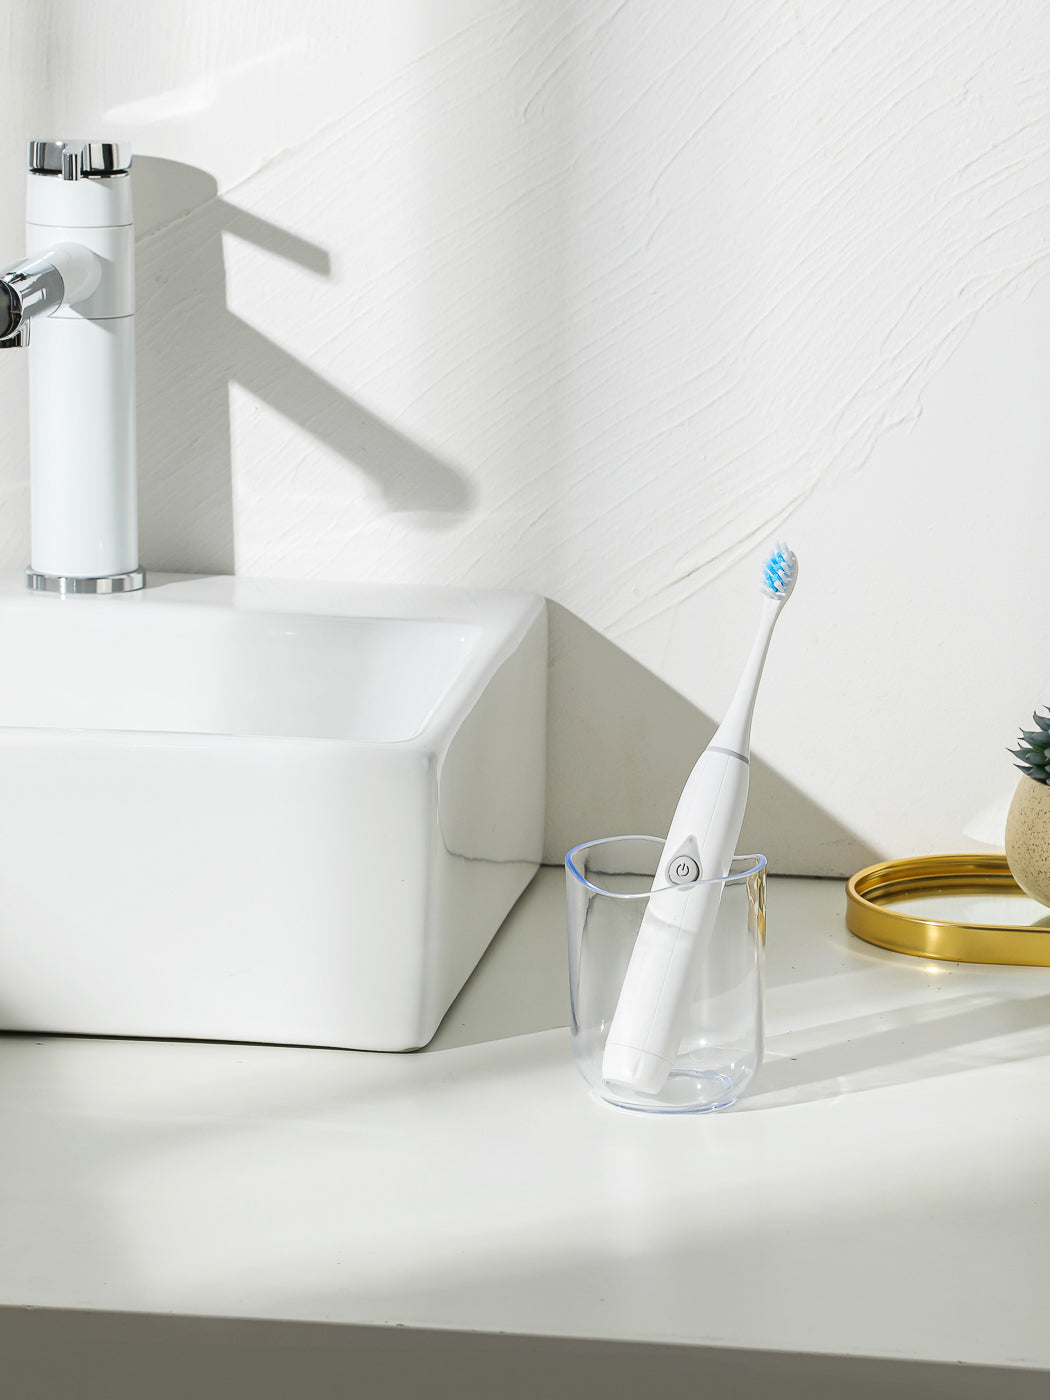 MINISO MULTI-COLOR ELECTRIC TOOTHBRUSH KIT(LIGHT GRAY) 2010566511108 ELECTRIC BRUSH